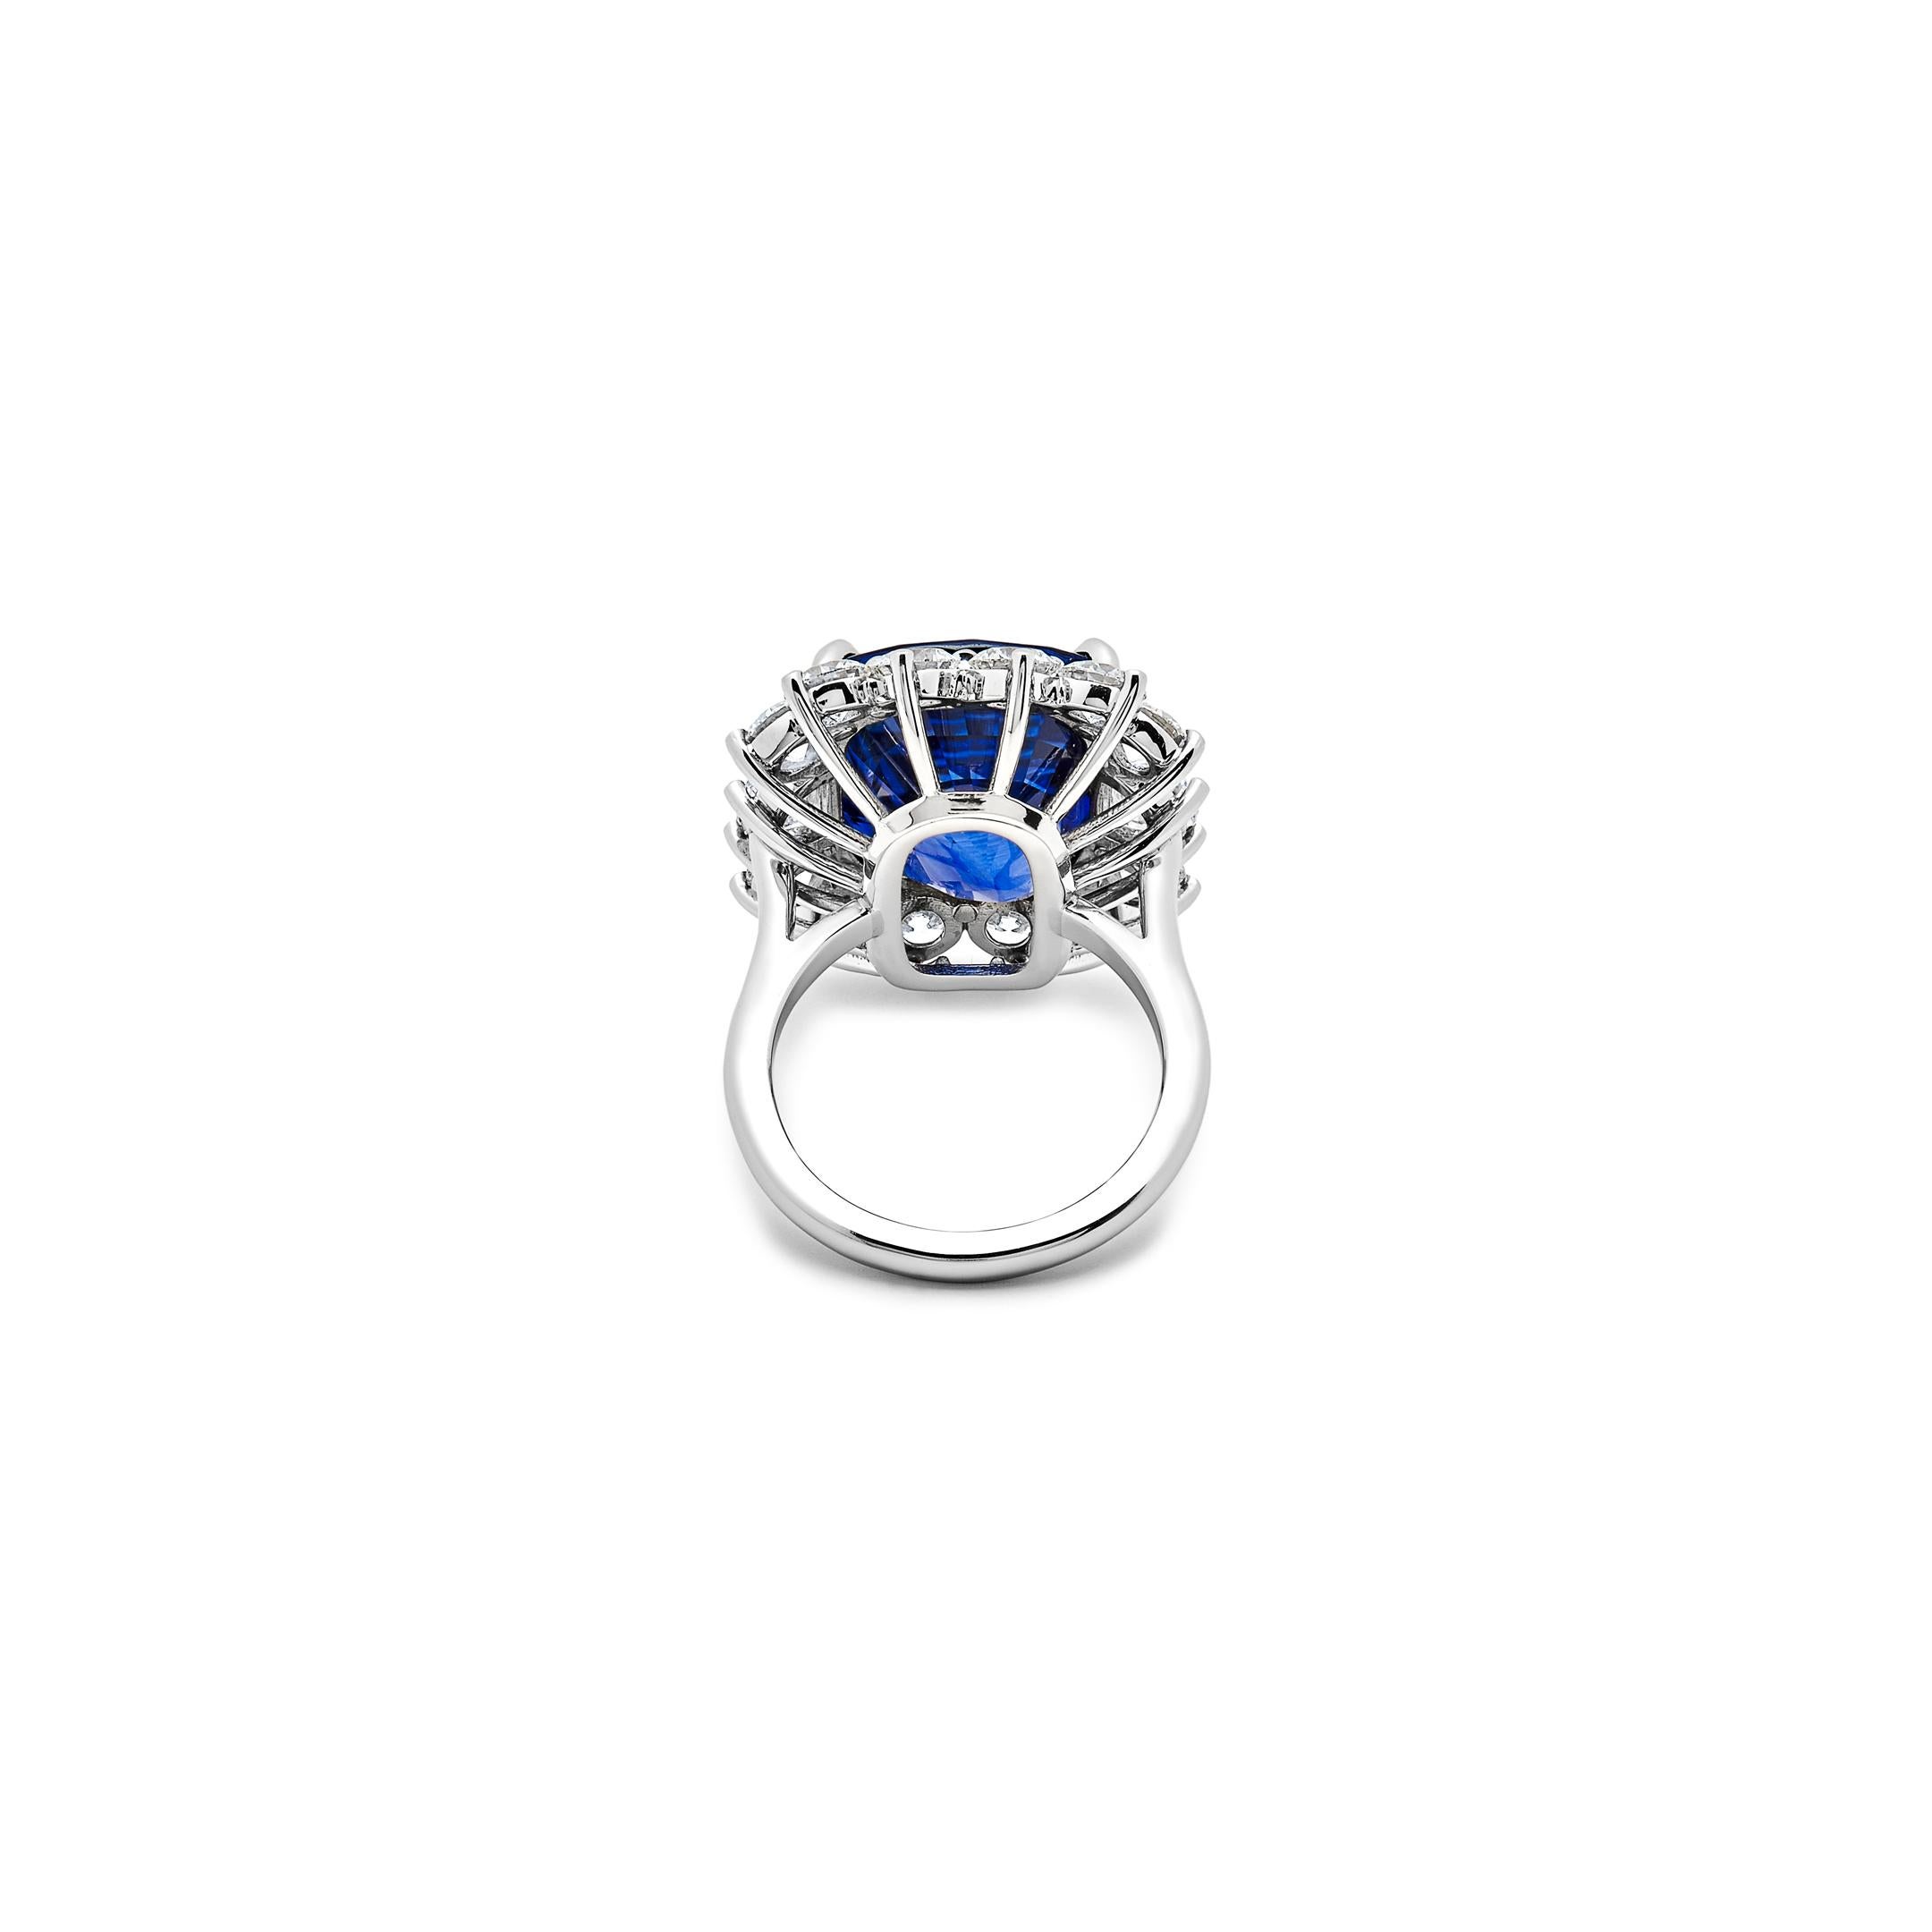 Elevate your style with our stunning Ceylon Sapphire and Diamond Platinum Halo Ring. This exquisite piece features a mesmerizing blue sapphire from Sri Lanka in a baguette cut.
The captivating blue sapphire with an impressive weight of a total of